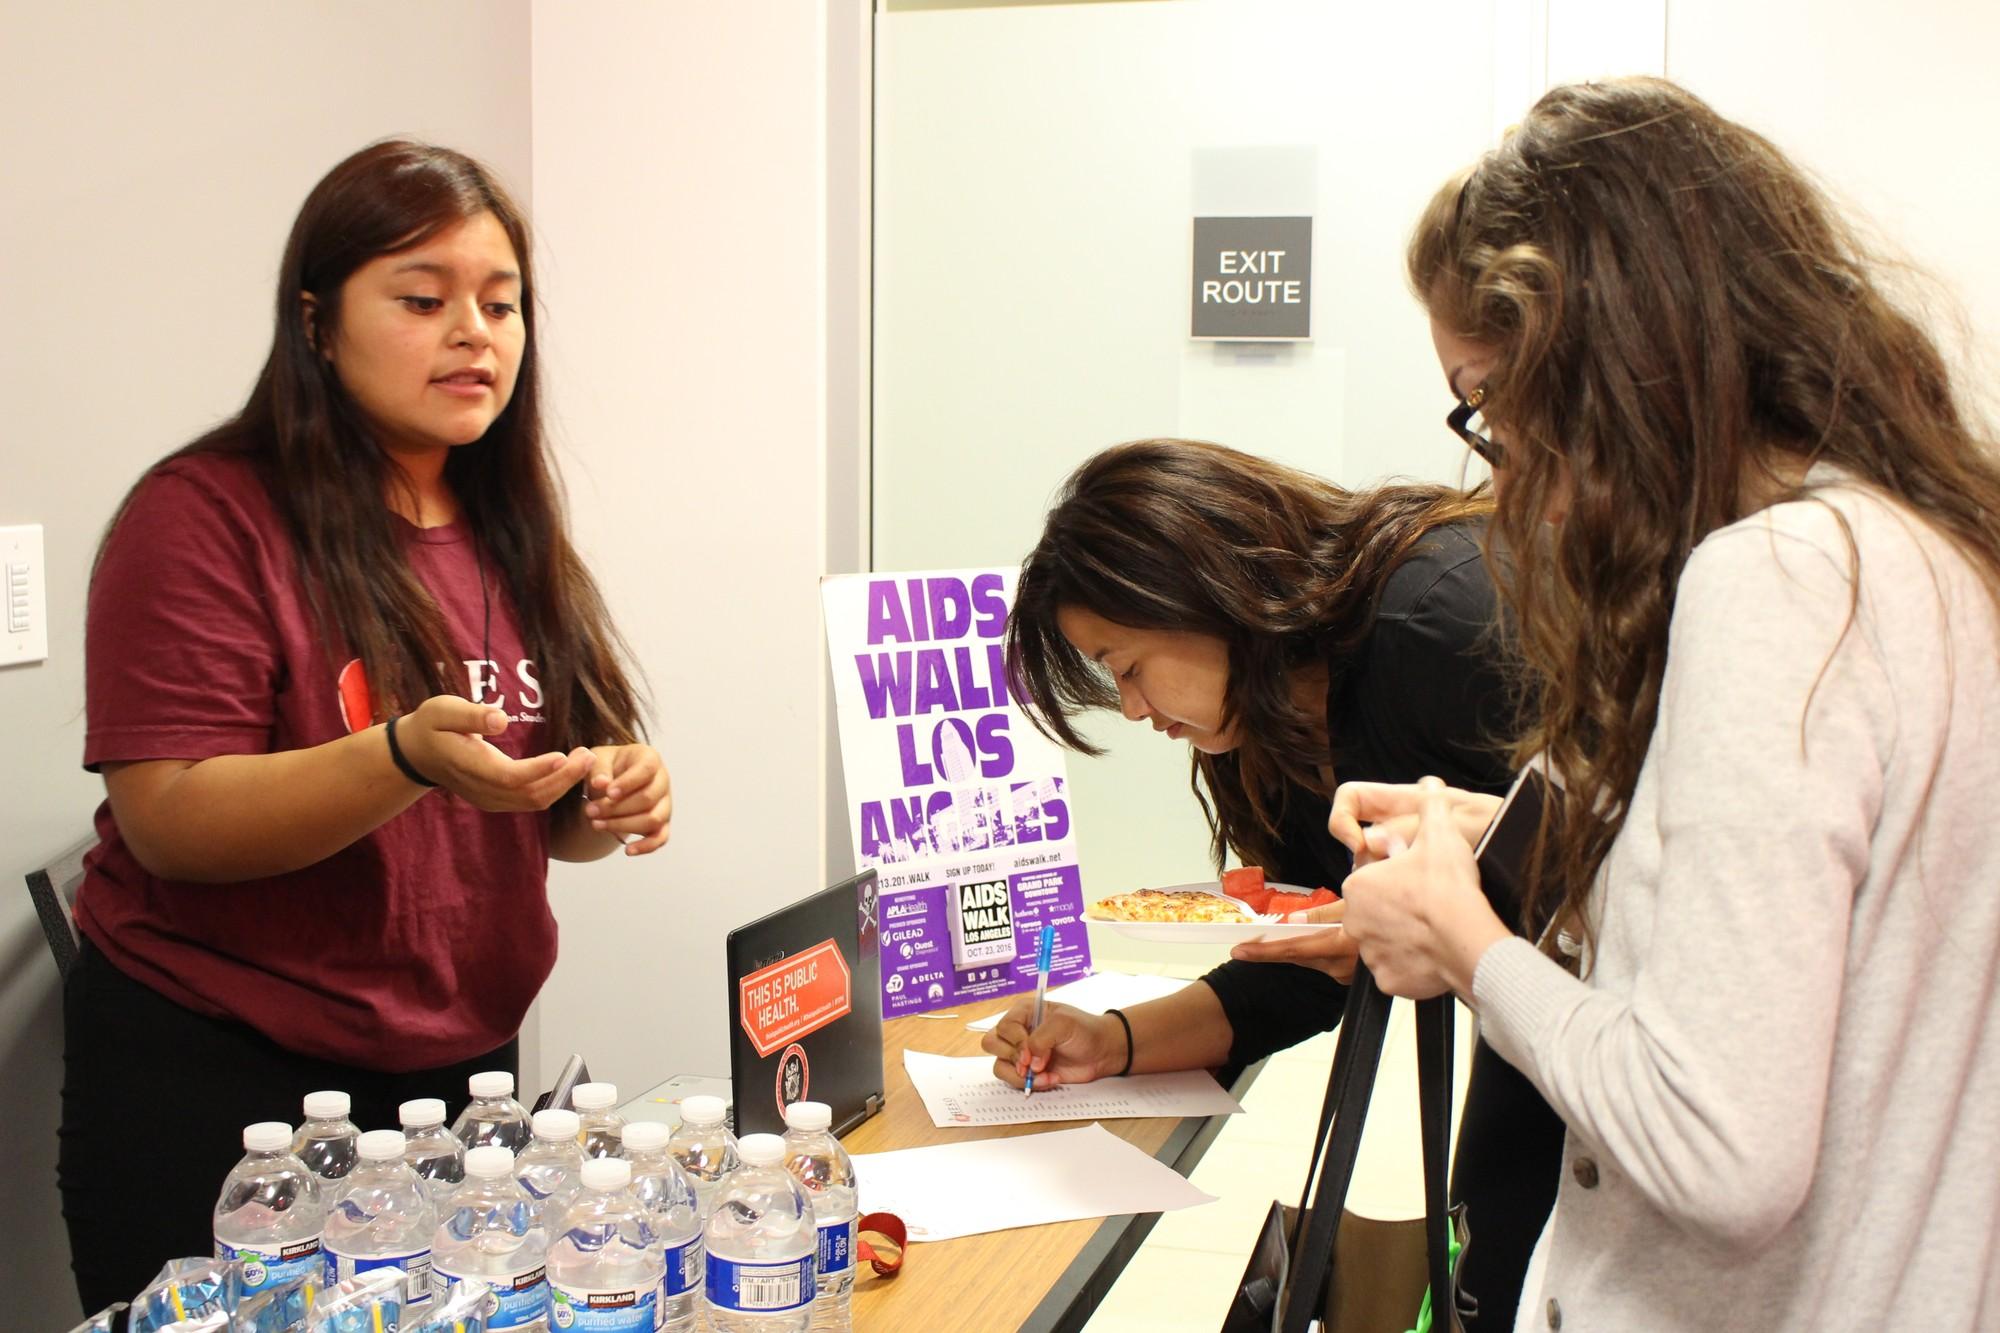 students sign up for AIDS walk